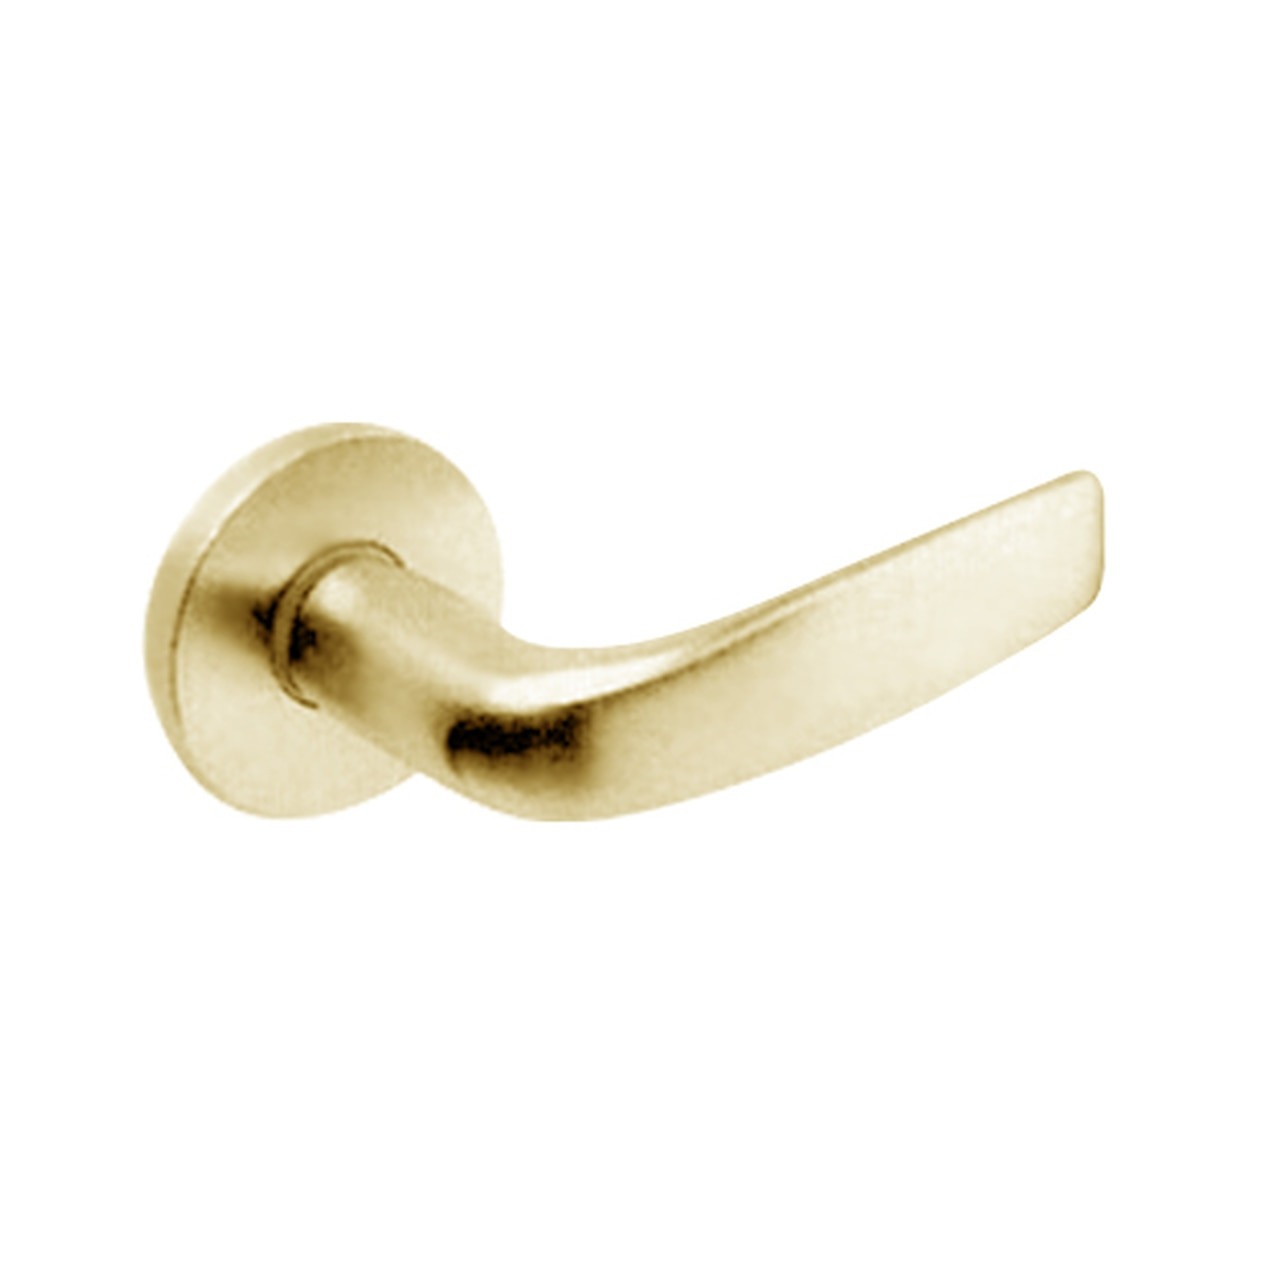 ML2067-CSF-605-M31 Corbin Russwin ML2000 Series Mortise Apartment Trim Pack with Citation Lever in Bright Brass